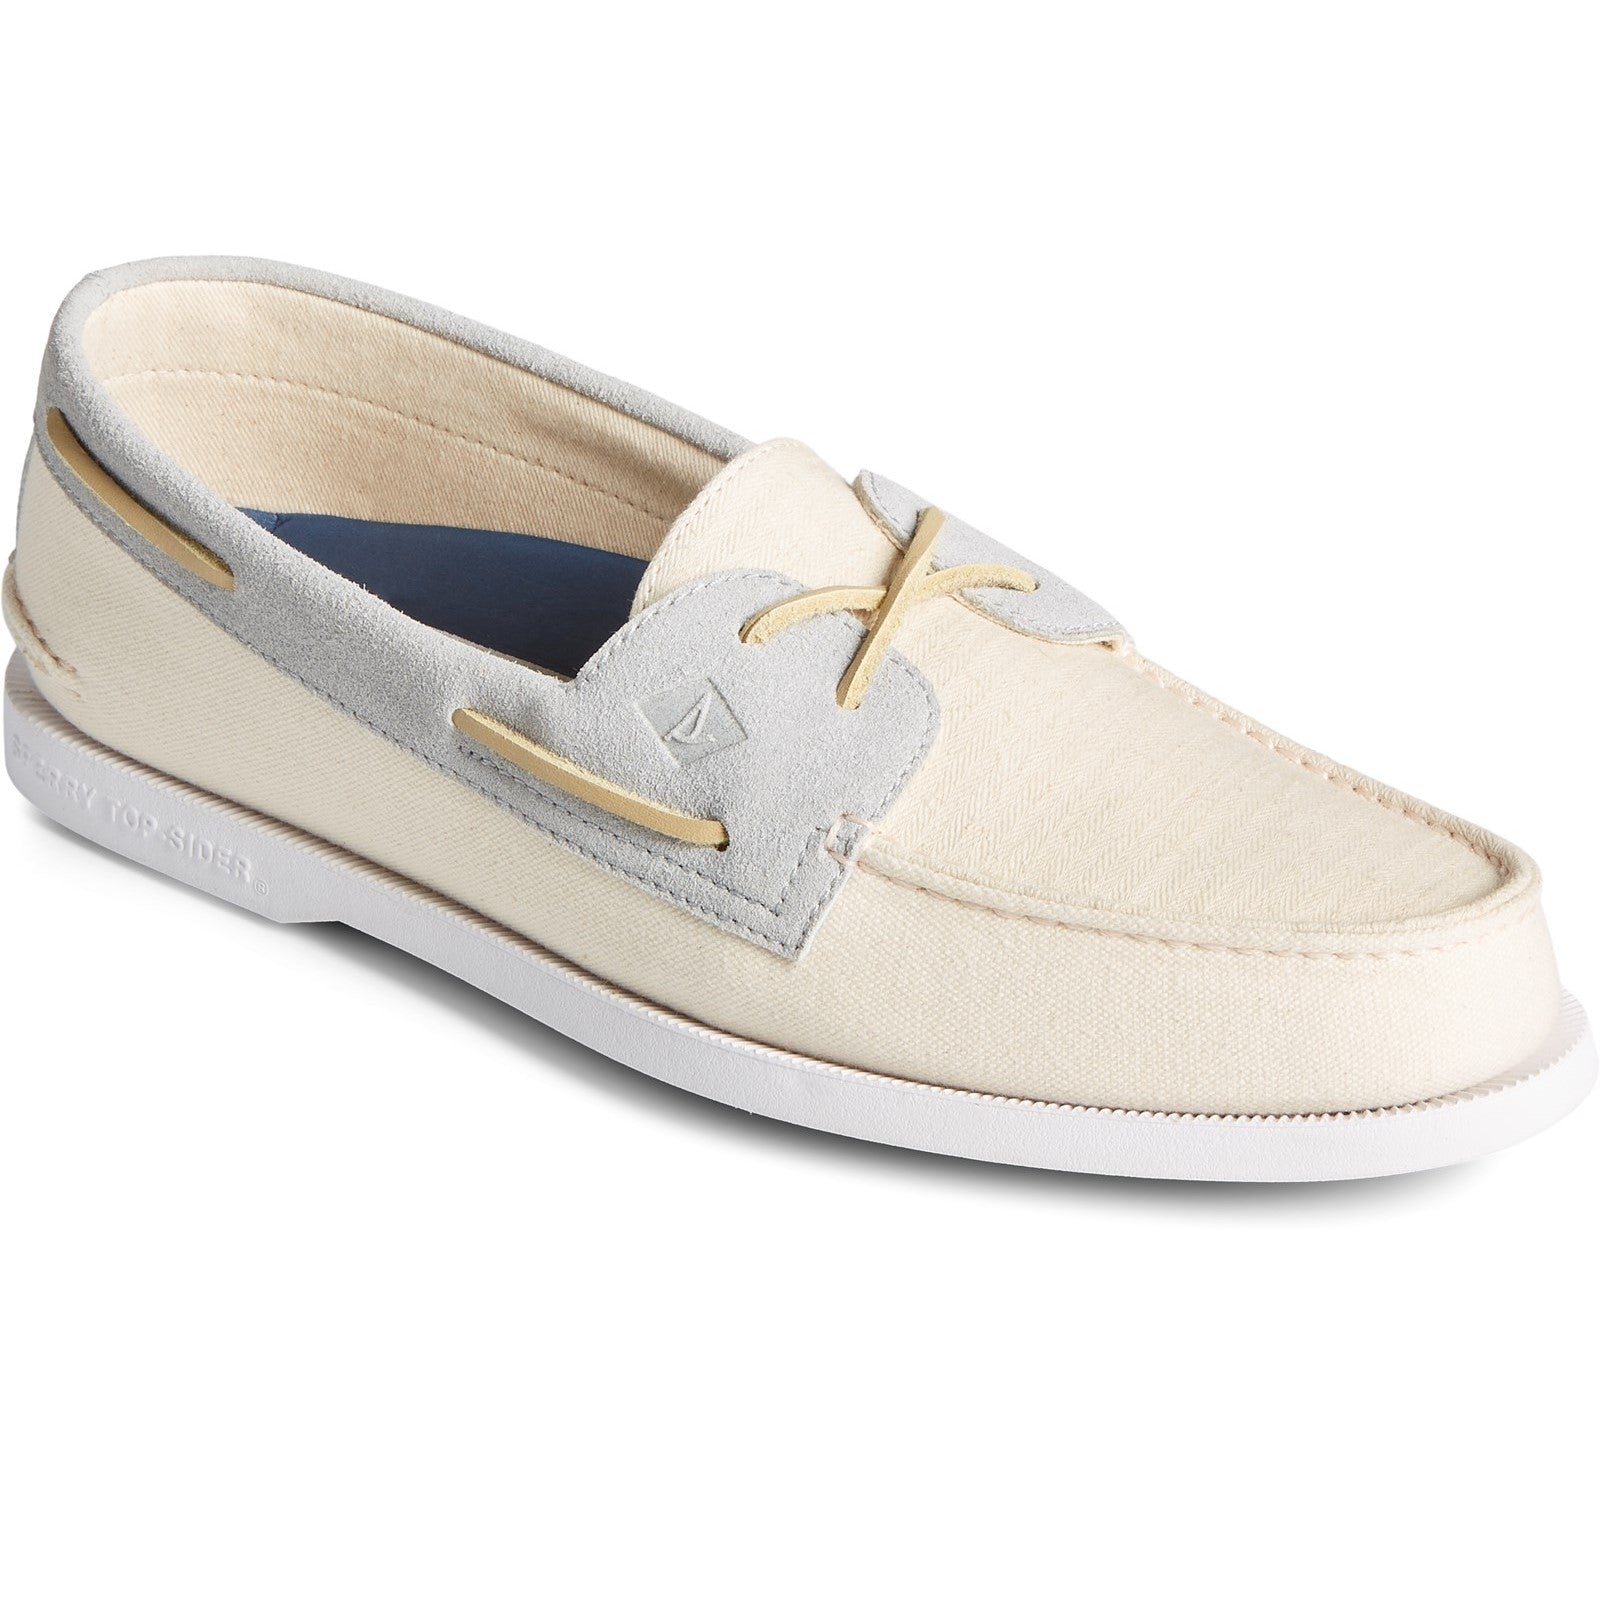 Sperry Mens Authentic Original 2-Eye Seacycled Boat Shoe - Tan